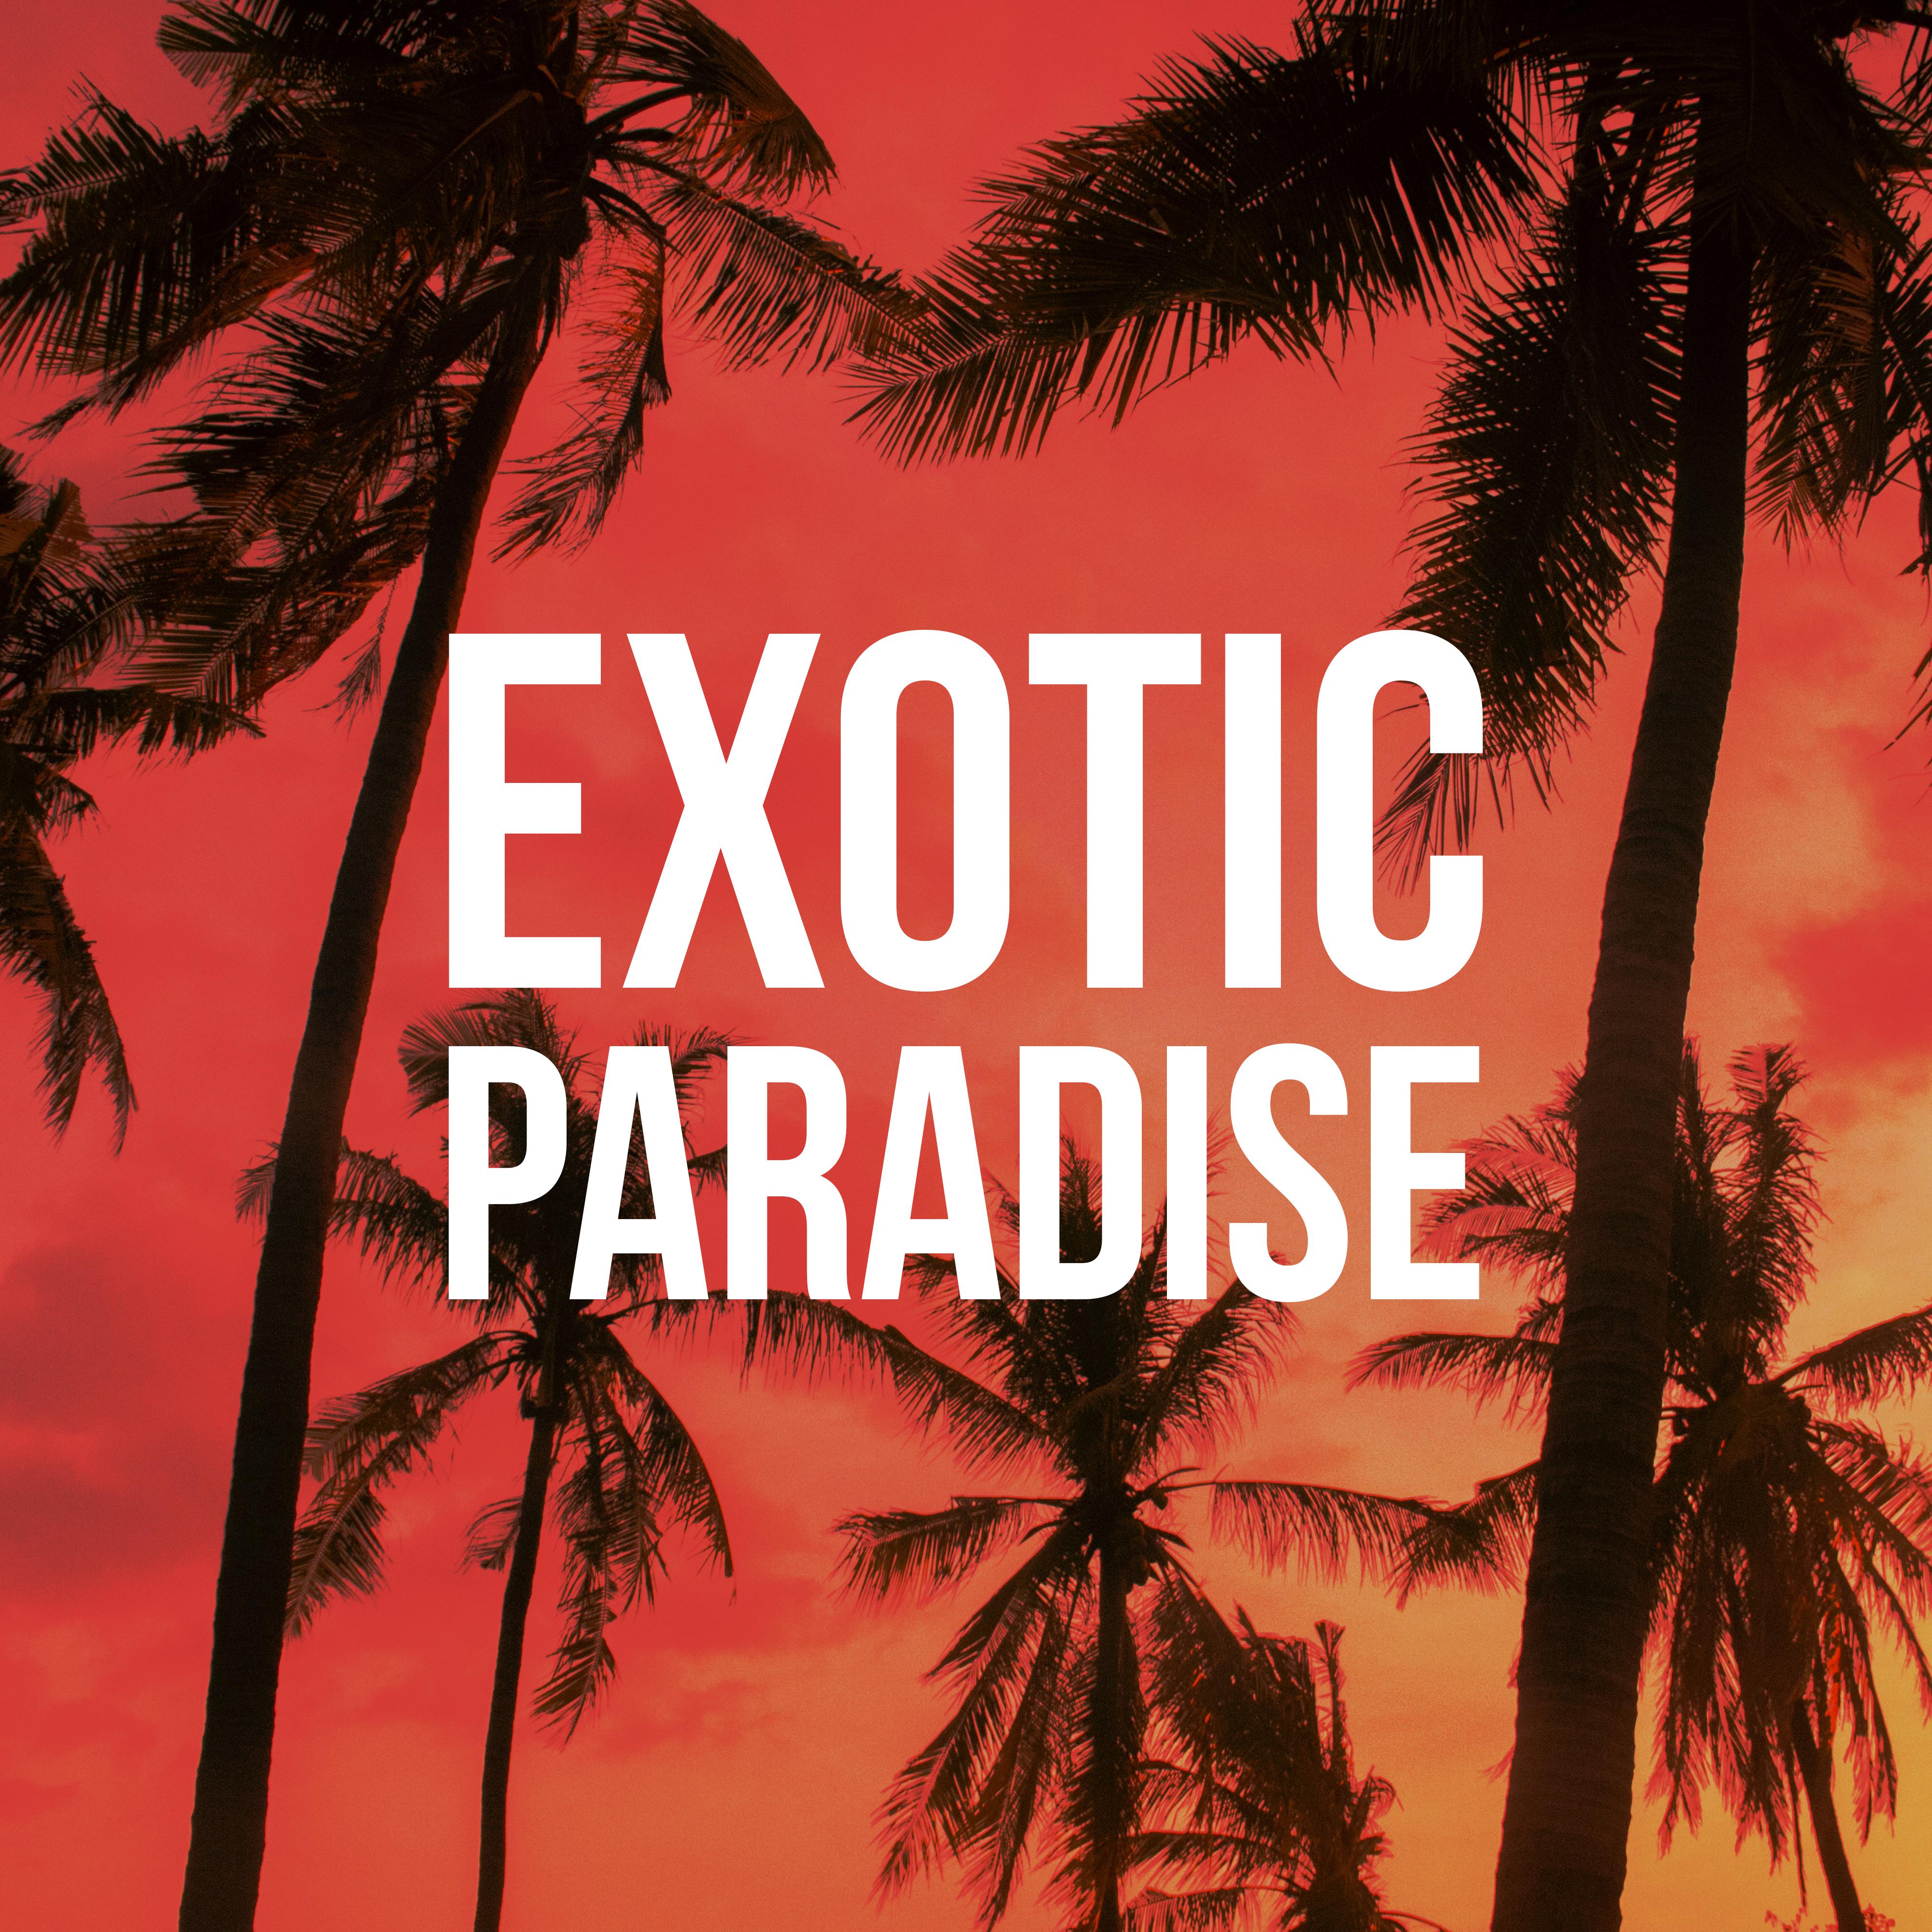 Exotic Paradise – Summer Music for Relaxation, Beach Chill, Calm Vibrations, Relaxing Chillout Moments, Chill Out 2019, Ibiza 2019